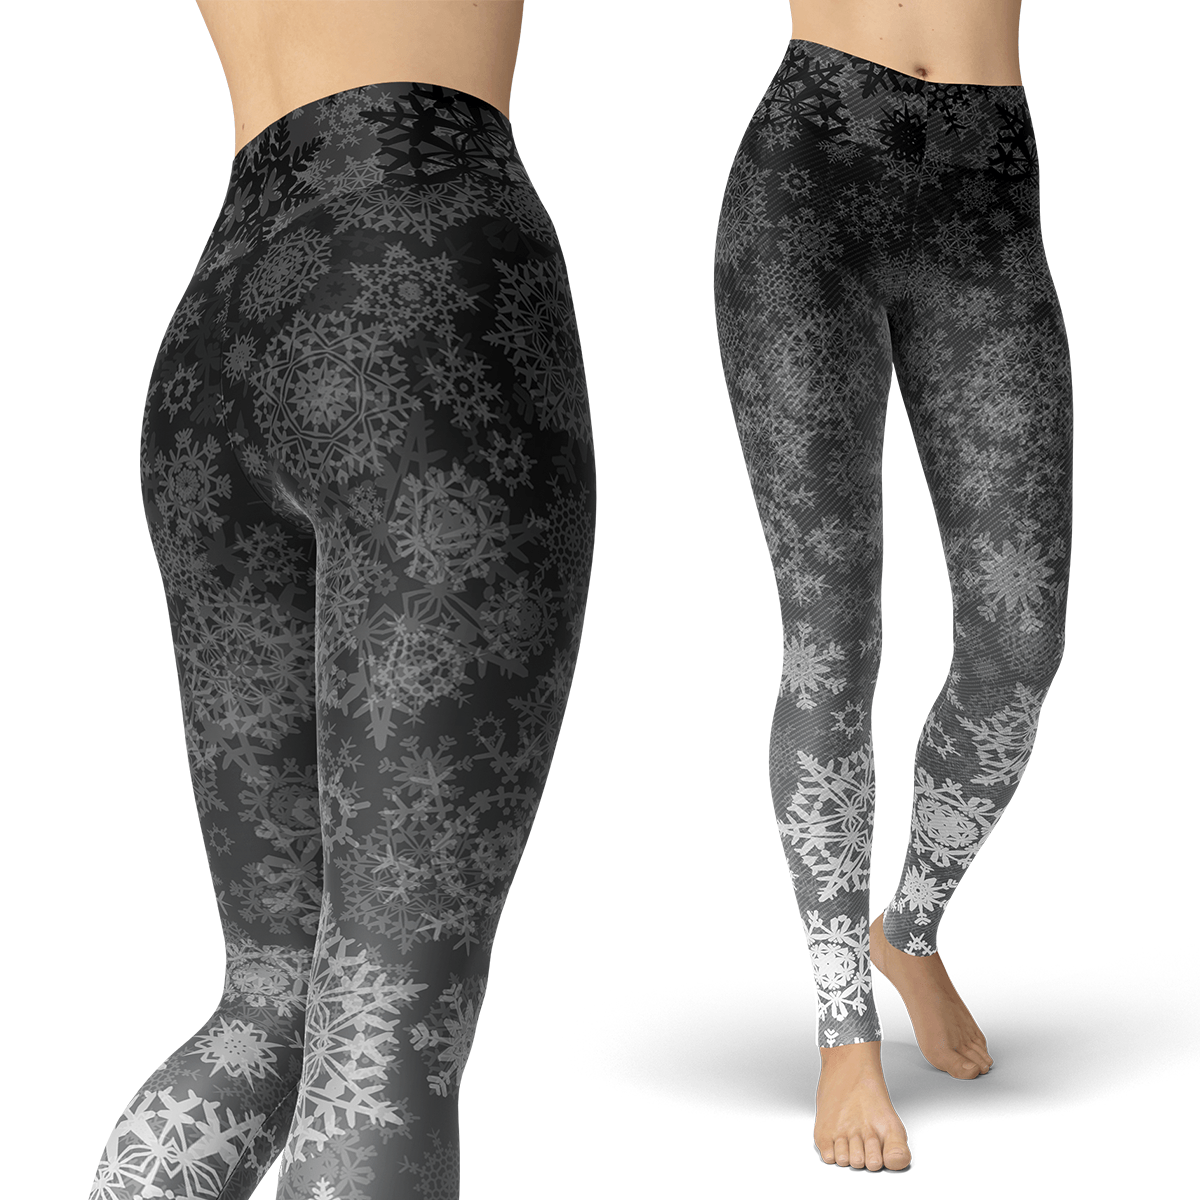  Snowflake Leggings For Women Christmas Graphic Printed High  Rise Sexy Skinny Tight Pants XL